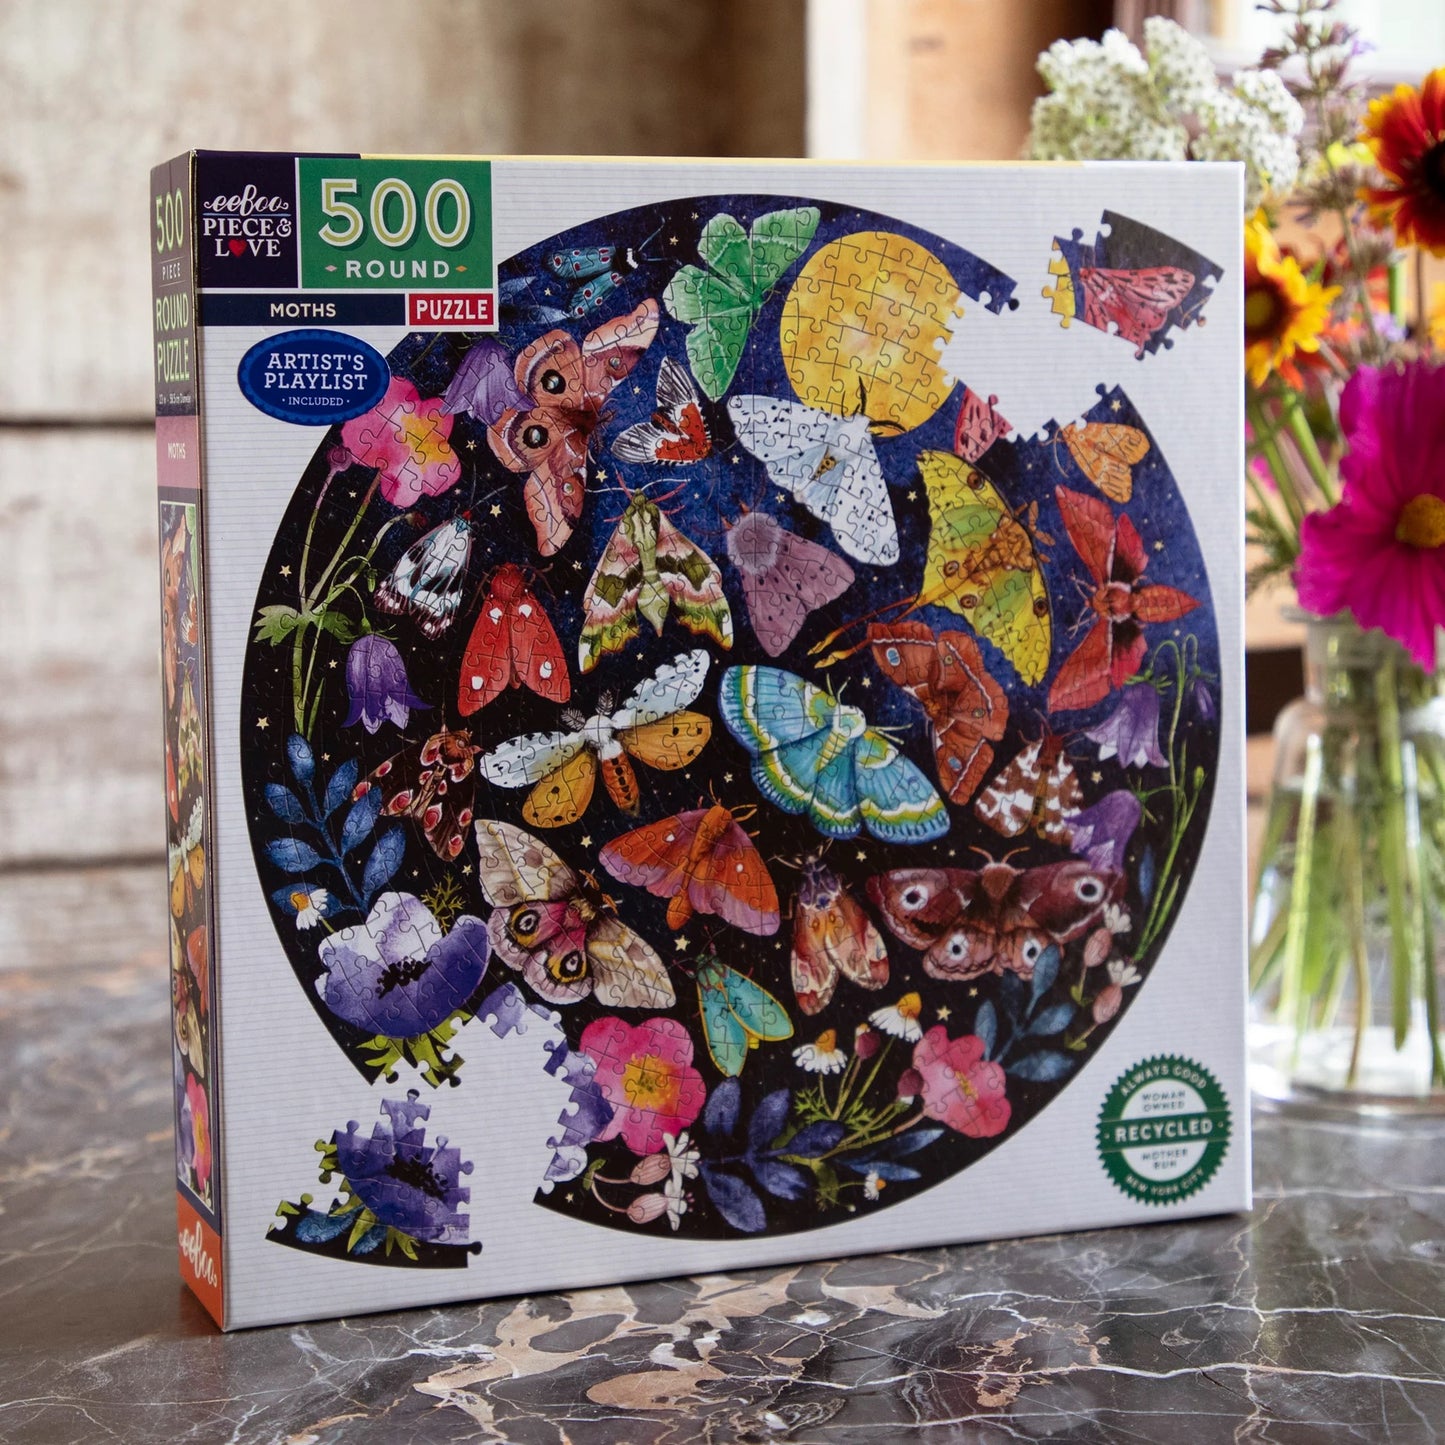 Moths 500-piece Round Puzzle in its box ext to a vase of flowers